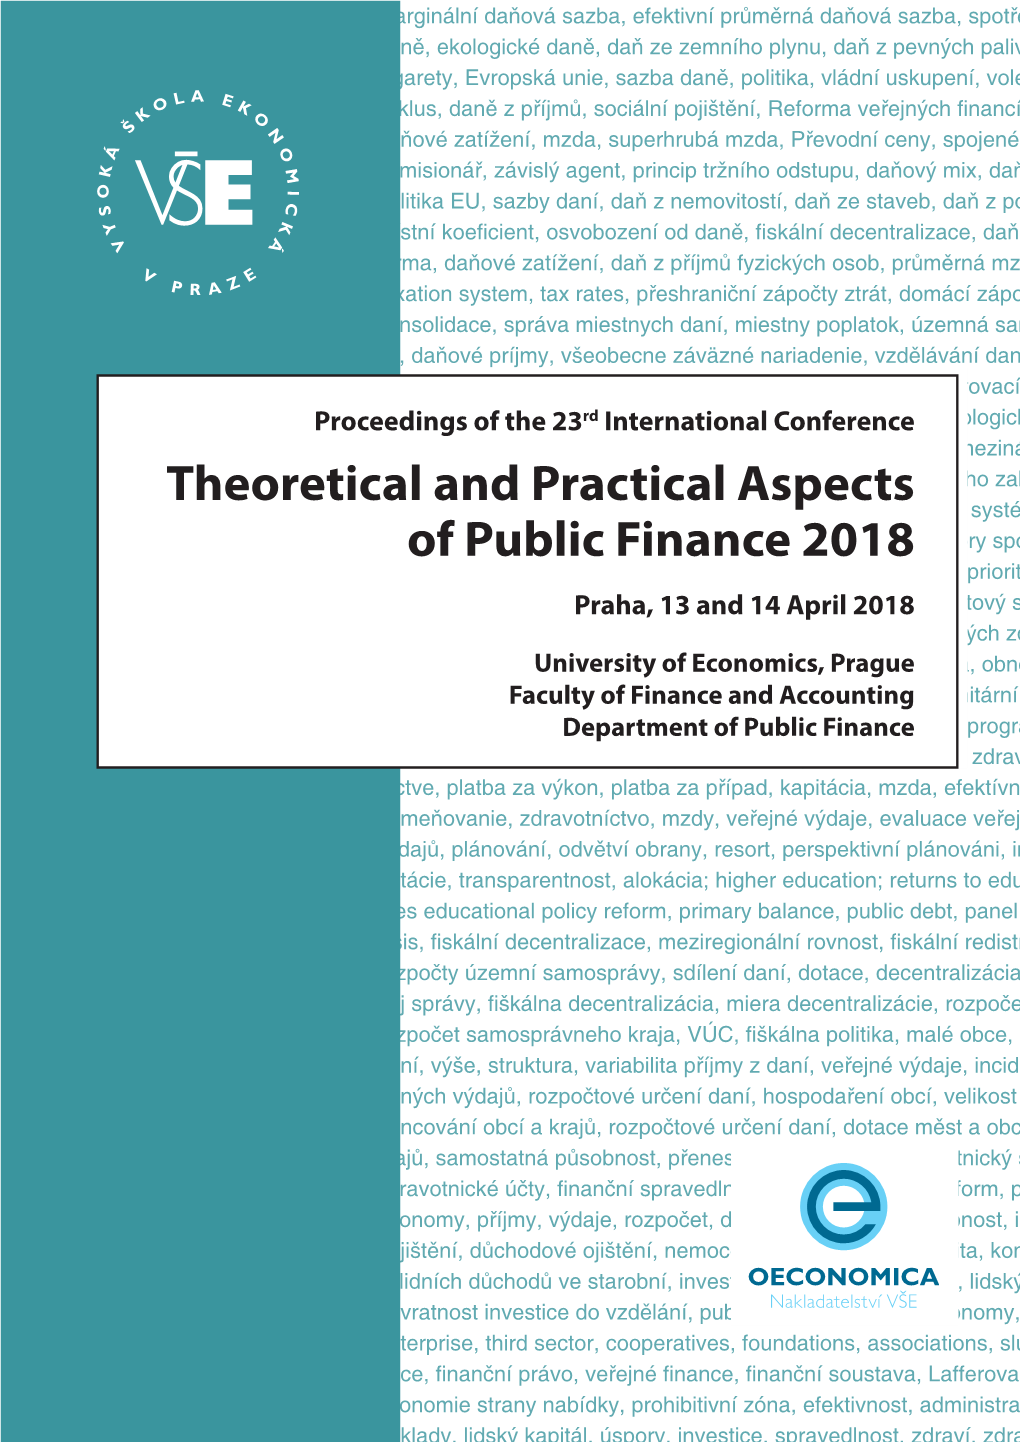 Theoretical and Practical Aspects of Public Finance 2018